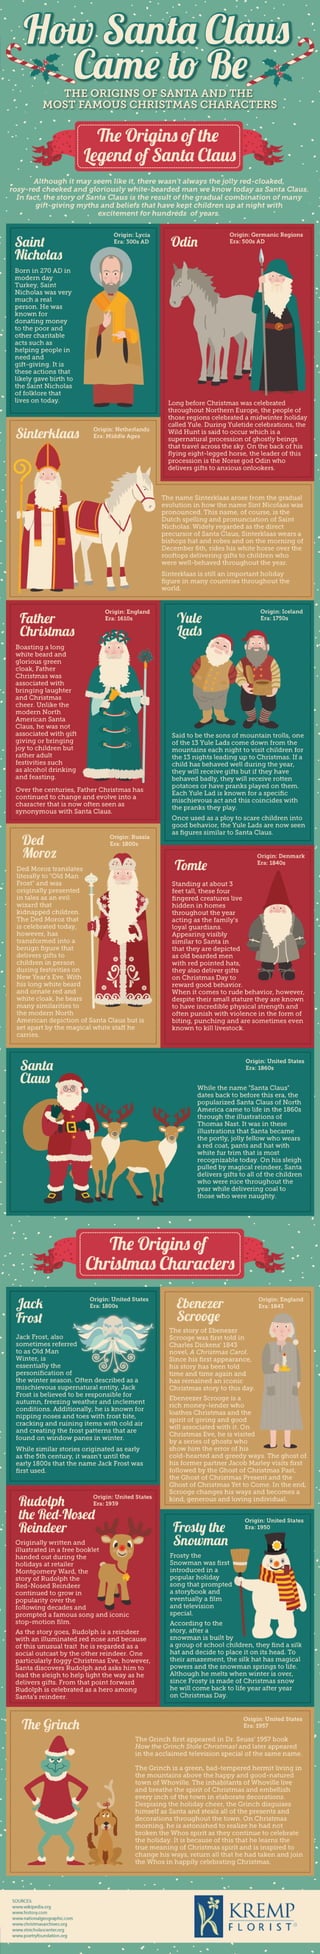 How Santa Claus Came to Be